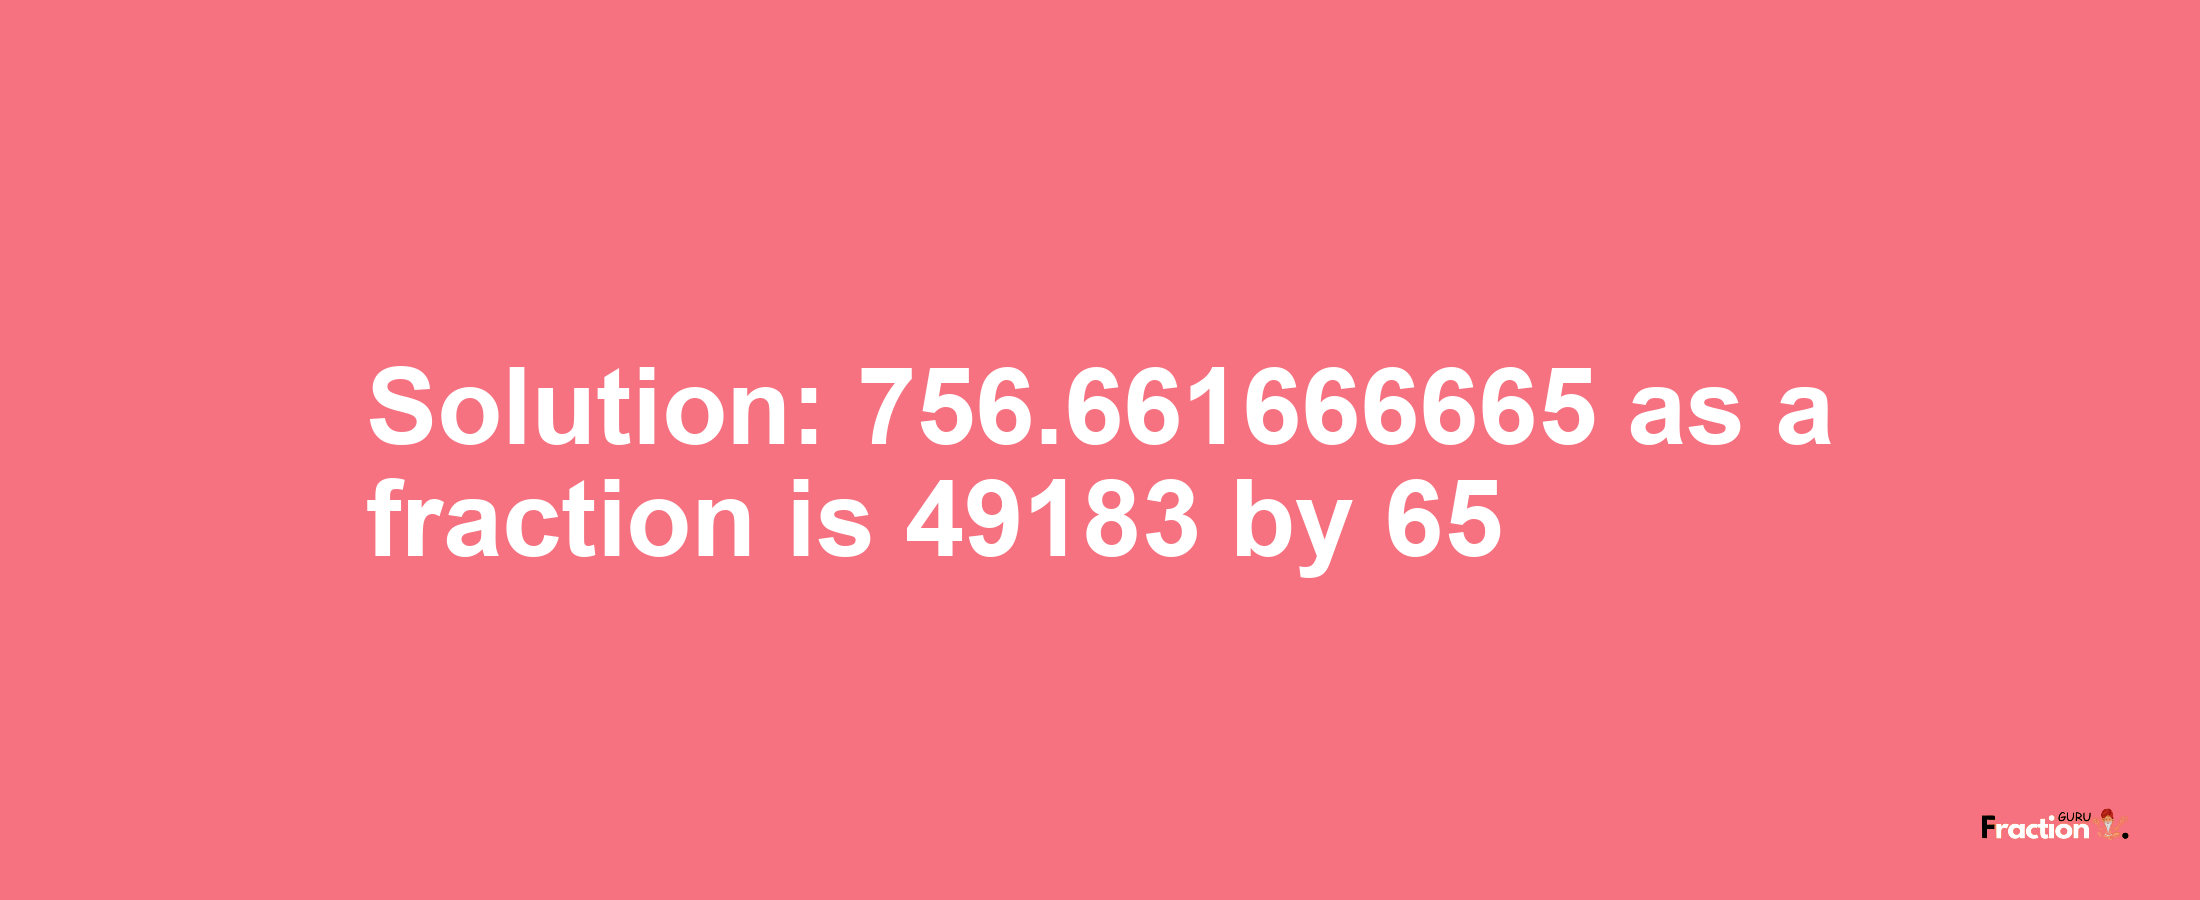 Solution:756.661666665 as a fraction is 49183/65